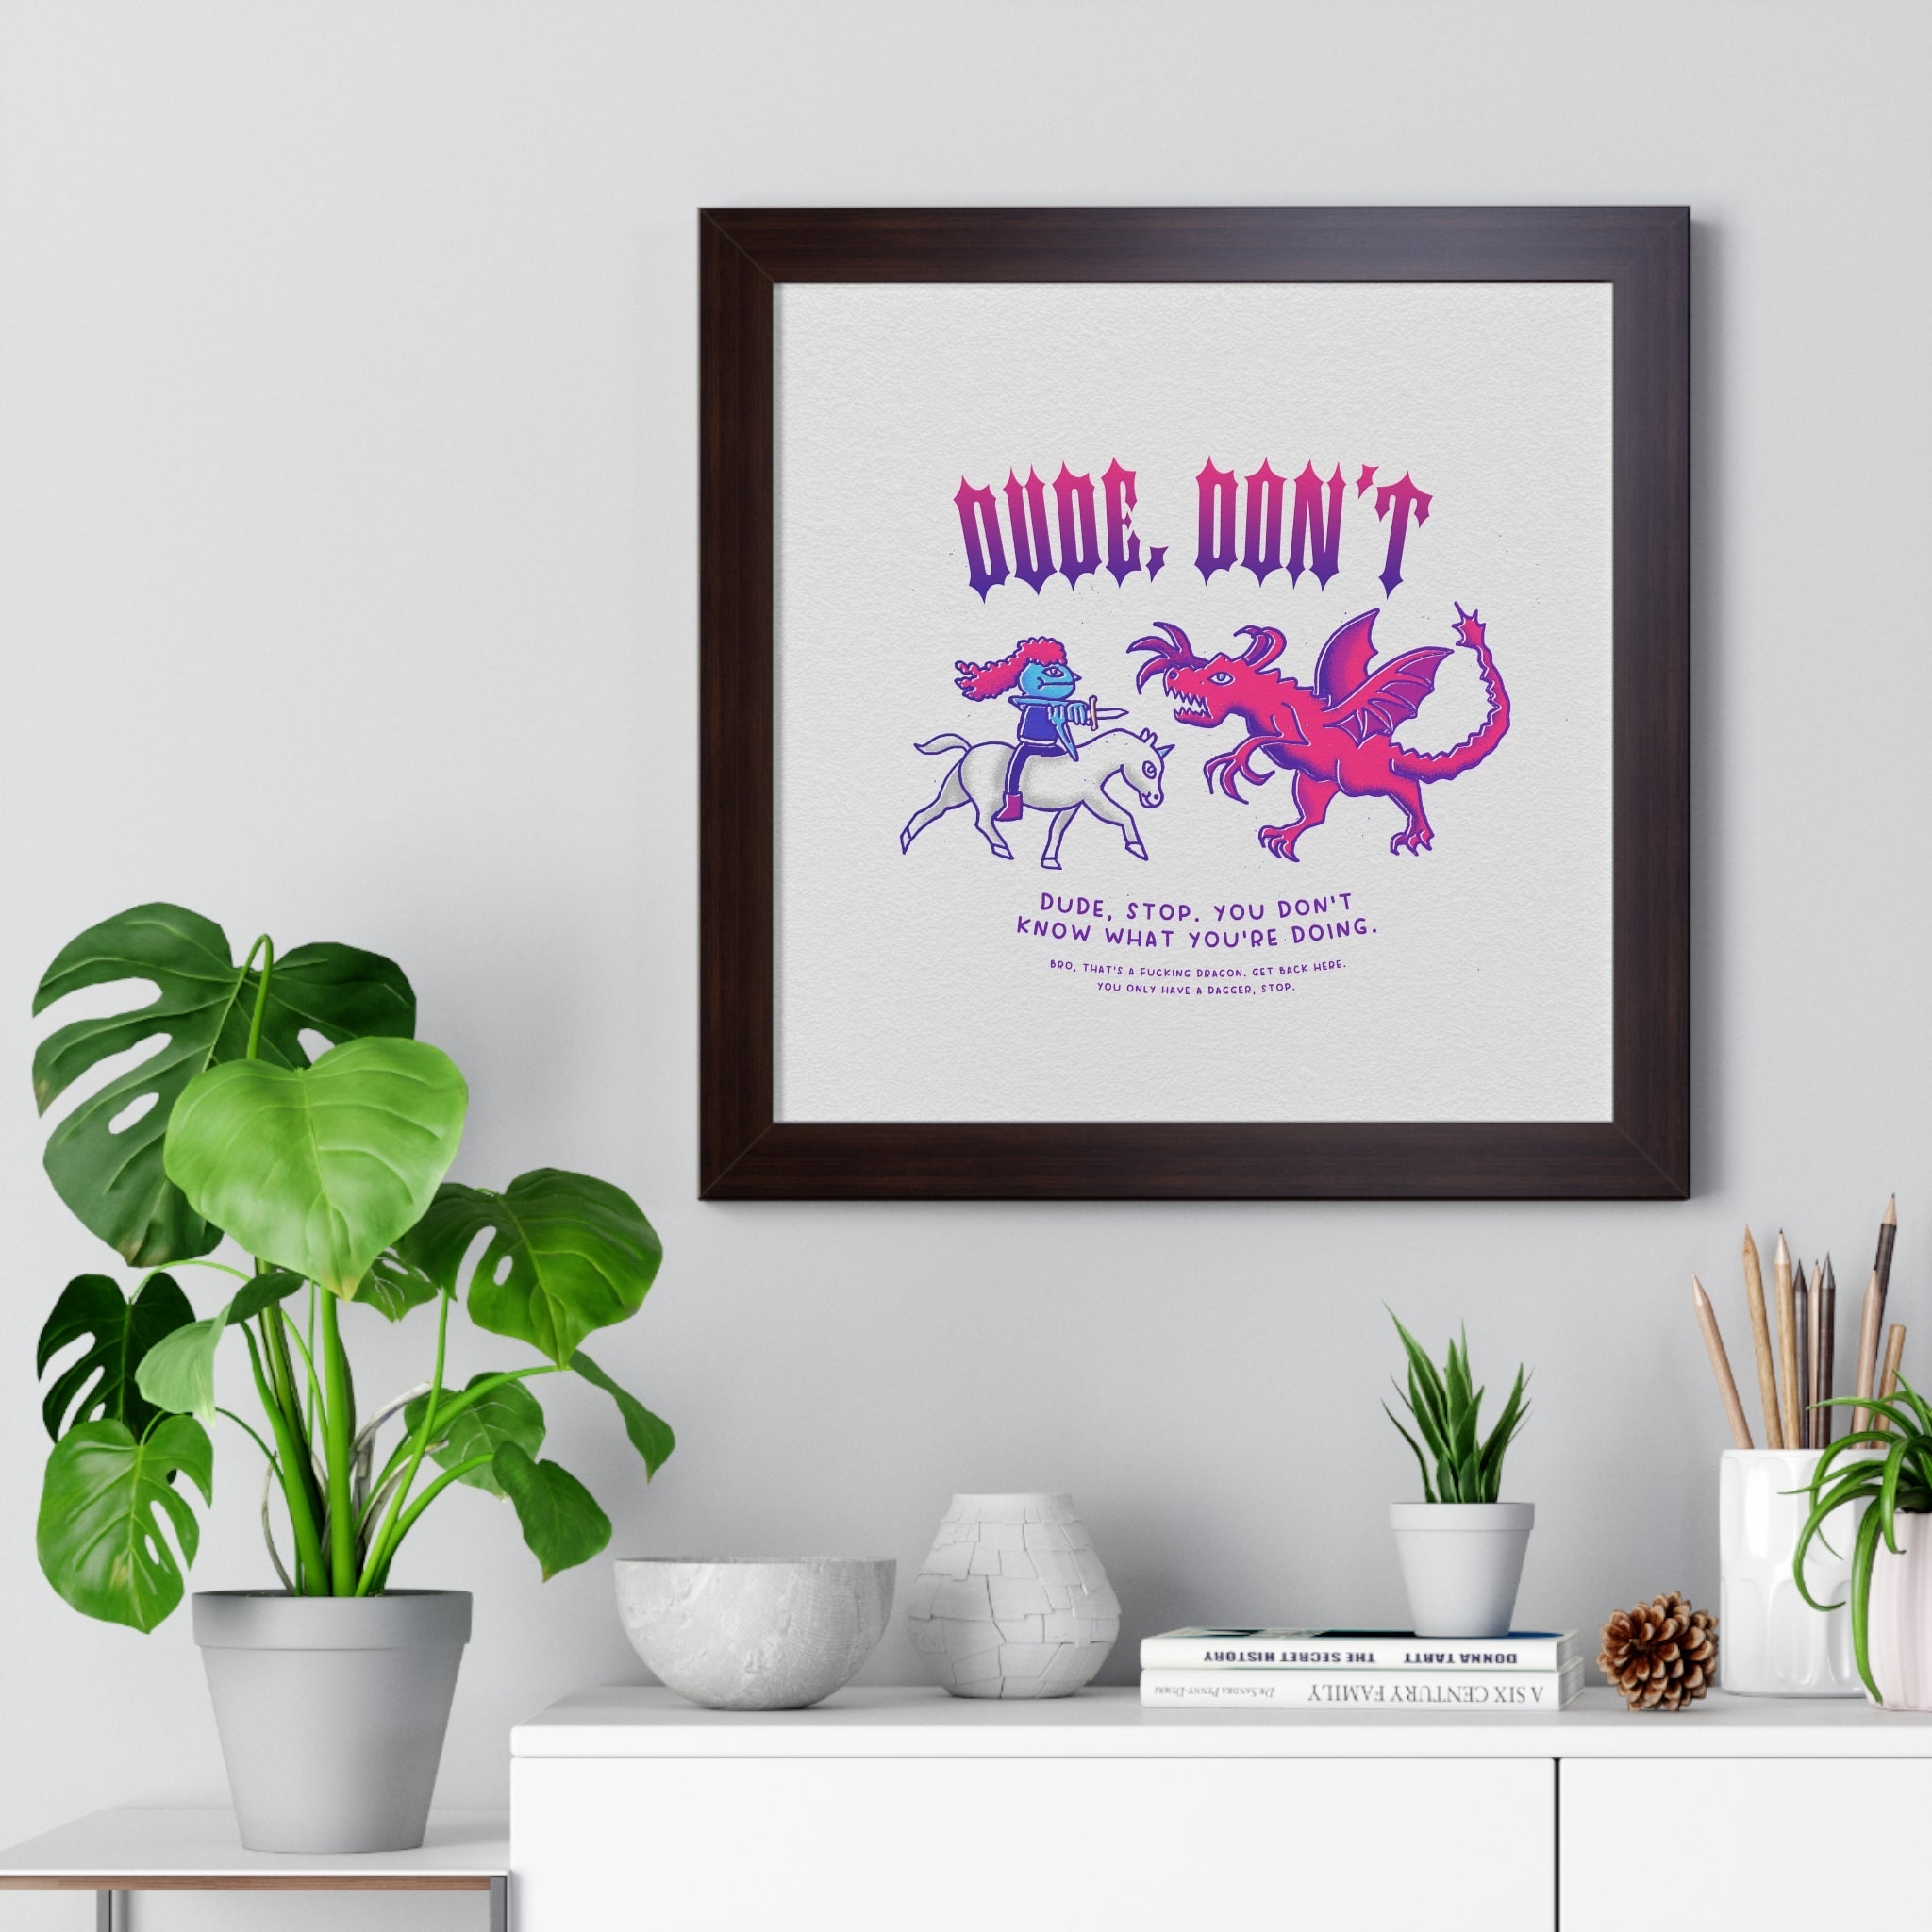 Dude, Don't | Framed Poster - Poster - Ace of Gnomes - 17352597010673721984